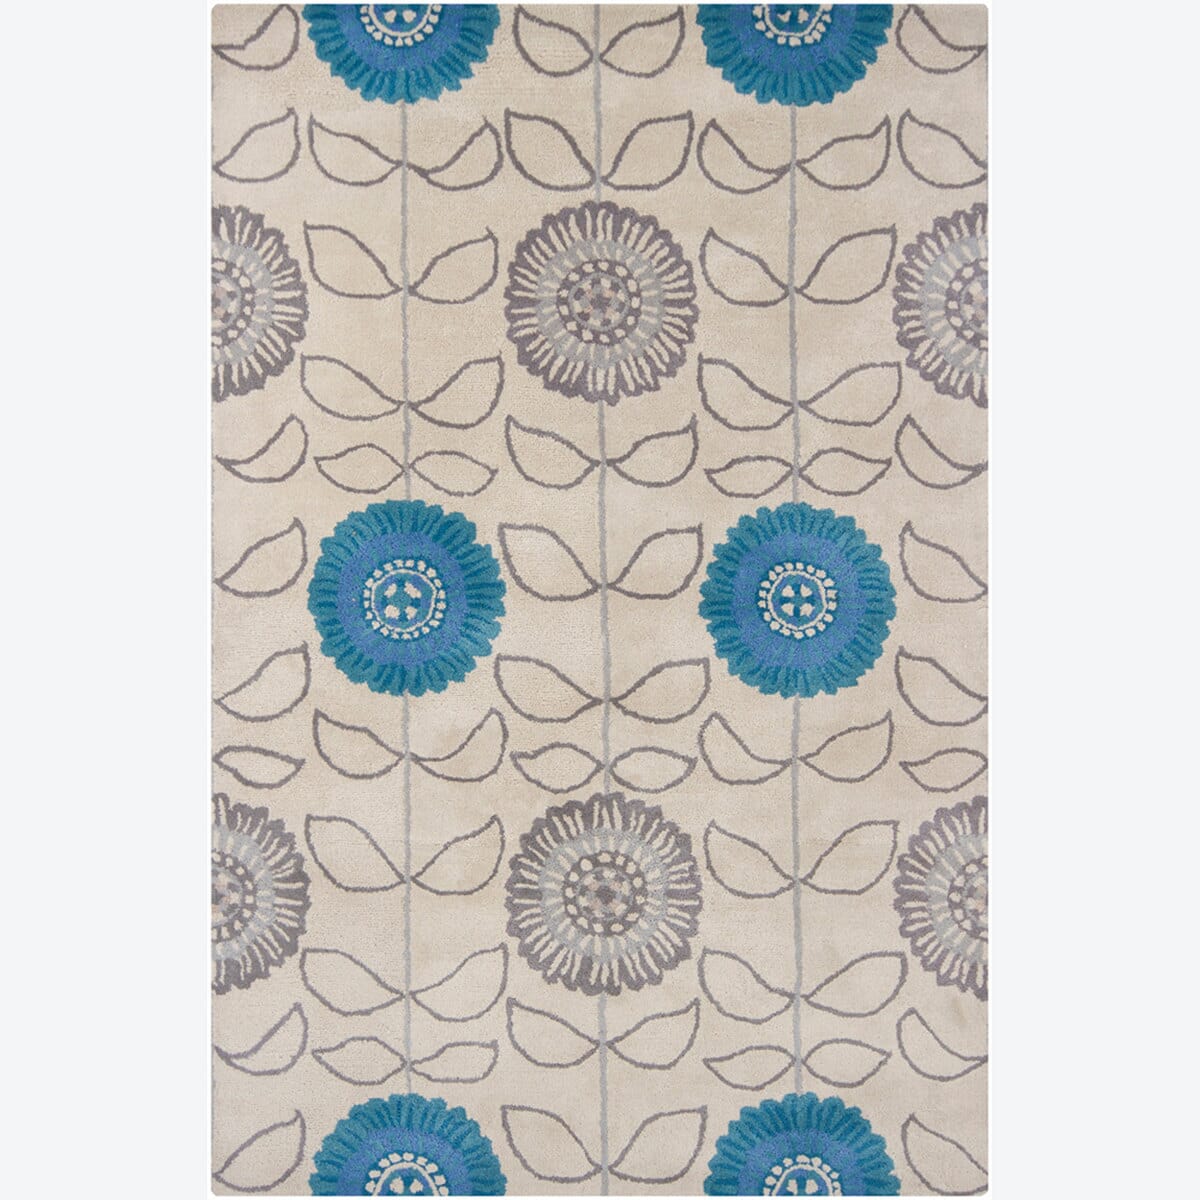 Chandra Chancery Int-13408 Blue Floral / Country Area Rug